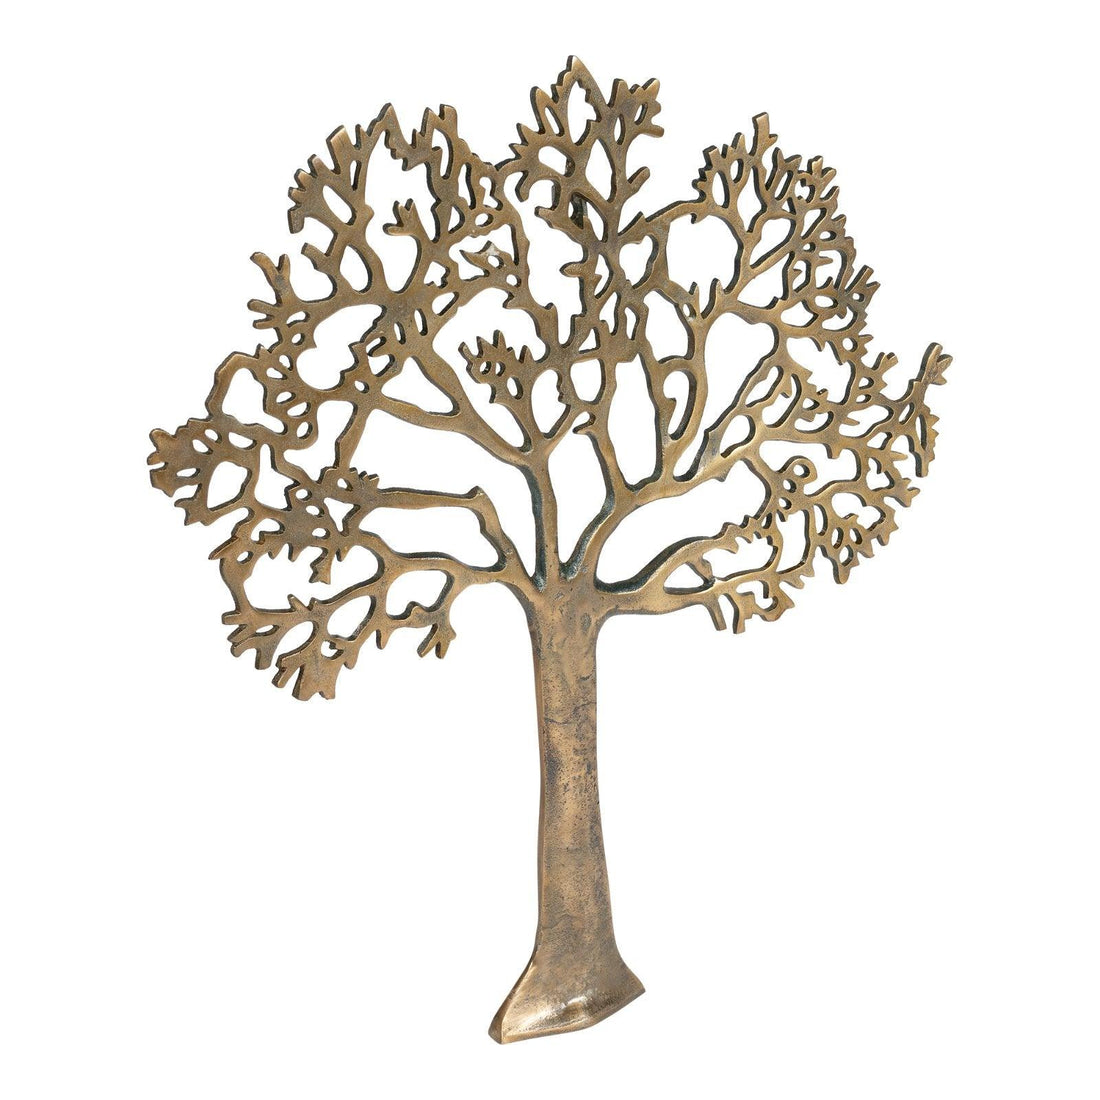 Large Gold Metal Tree Of Life Wall Plaque 61cm - £105.99 - Tree Of Life 